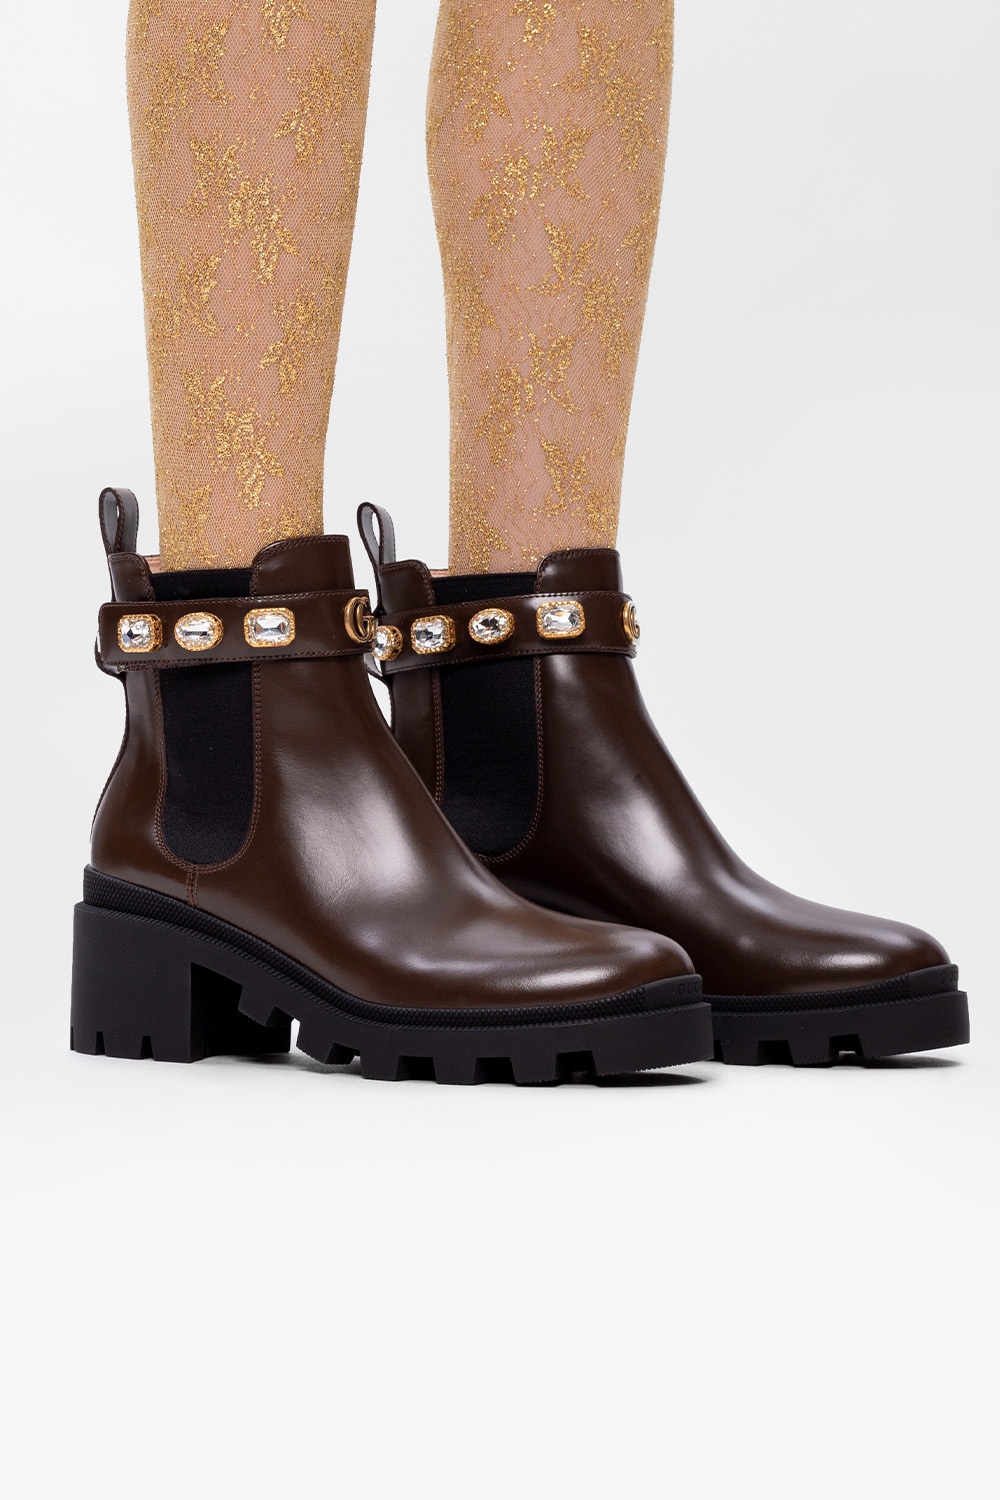 gucci embellished boots